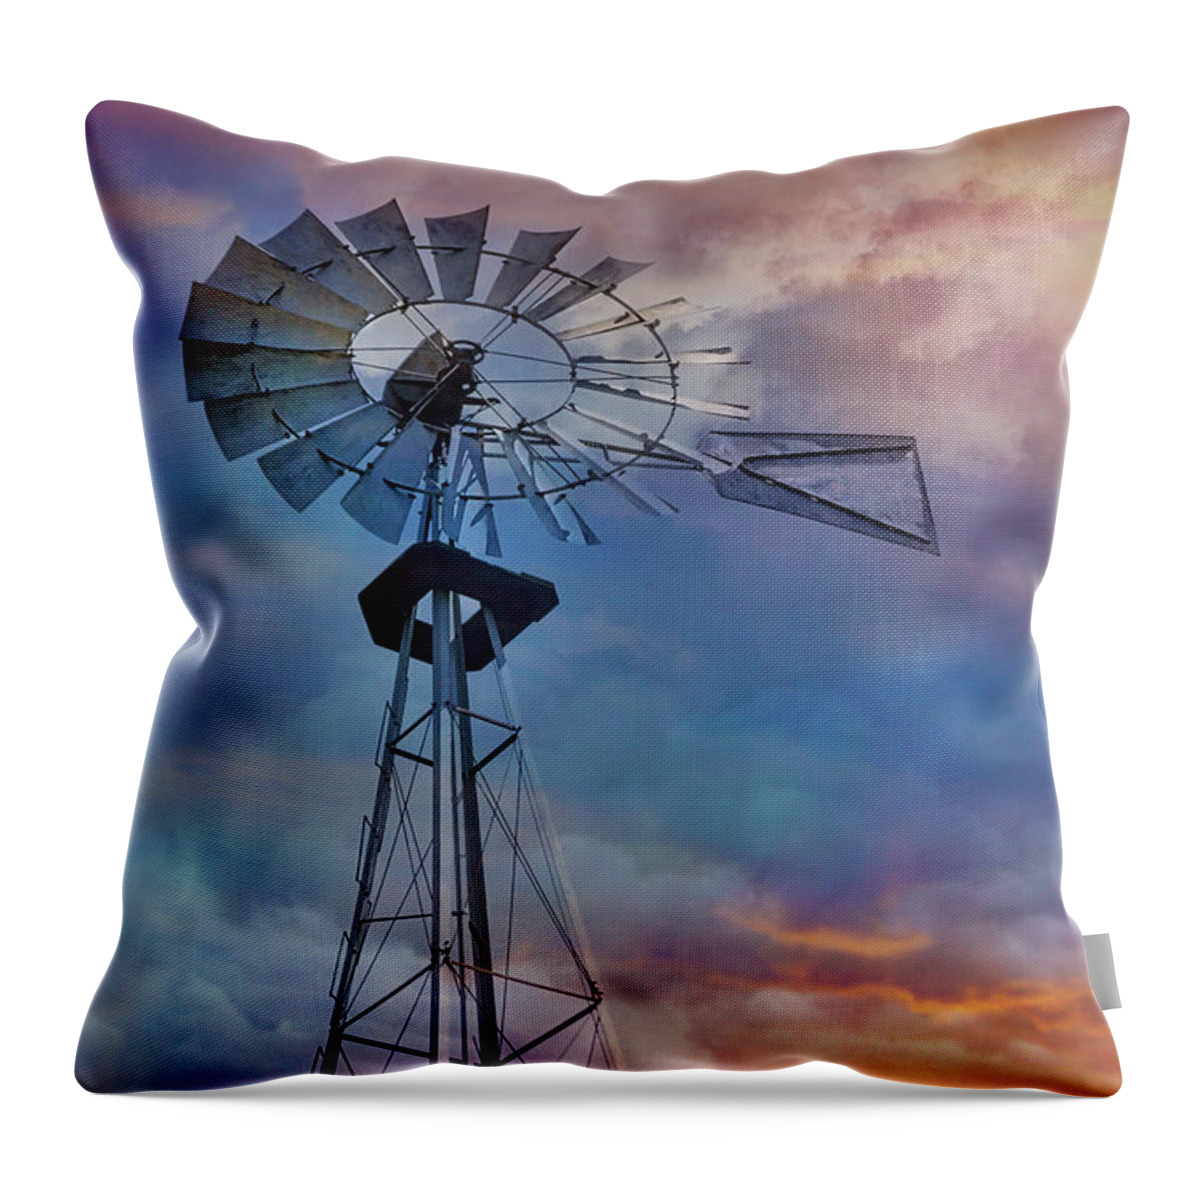 Windmill Throw Pillow featuring the photograph Windmill At Sunset by Susan Candelario